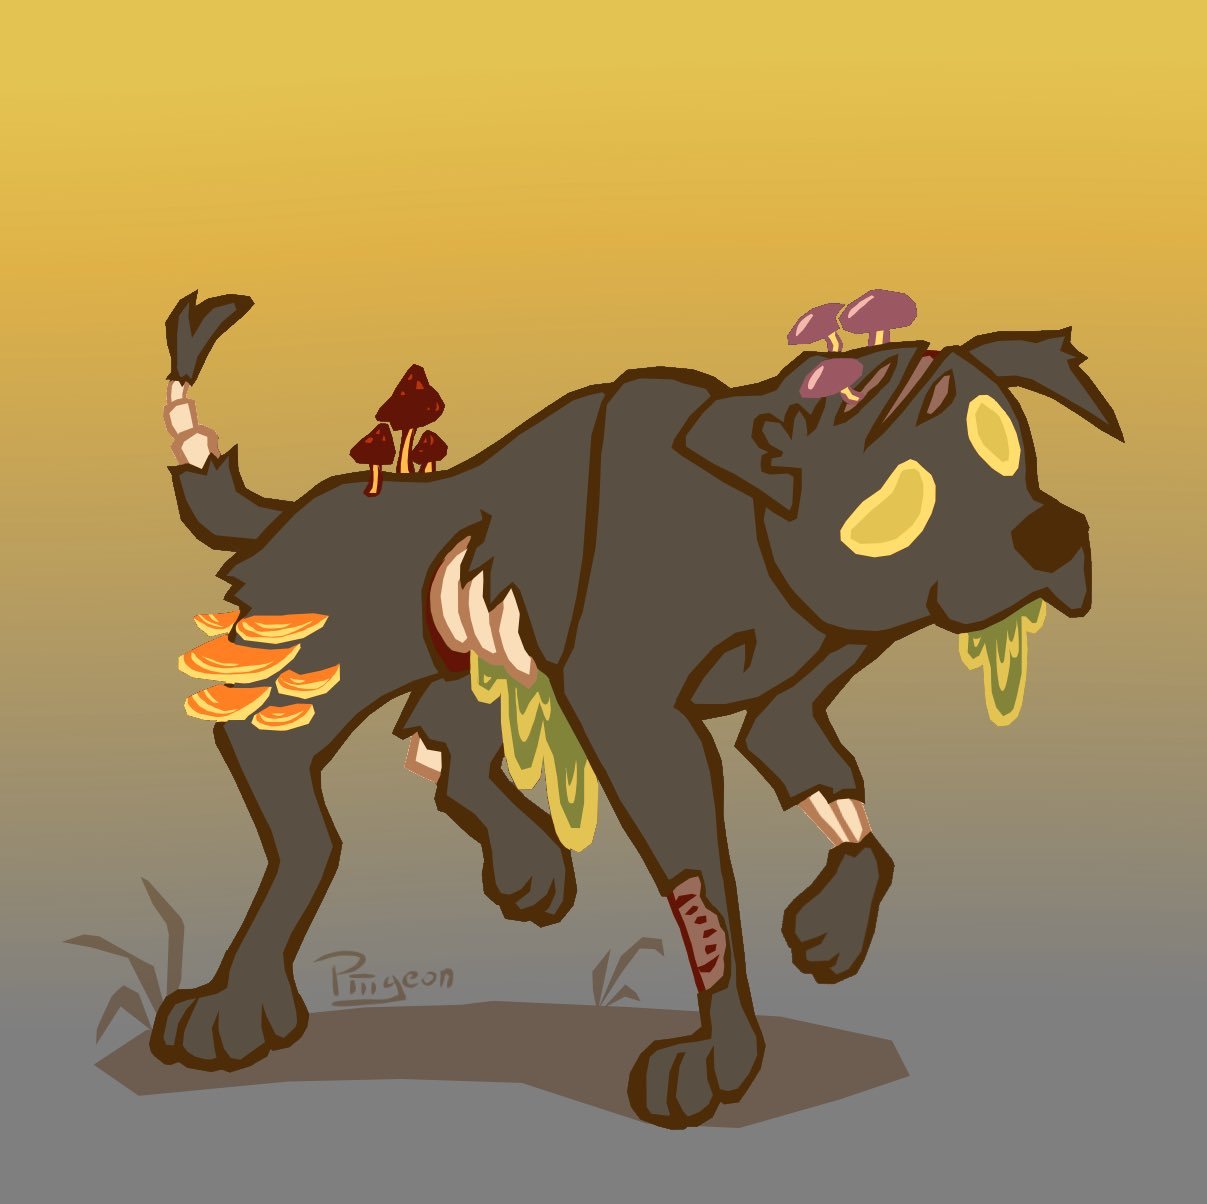 Happy Halloween!!! Have a zombie dog!
I hope everyone is having fun and staying safe!